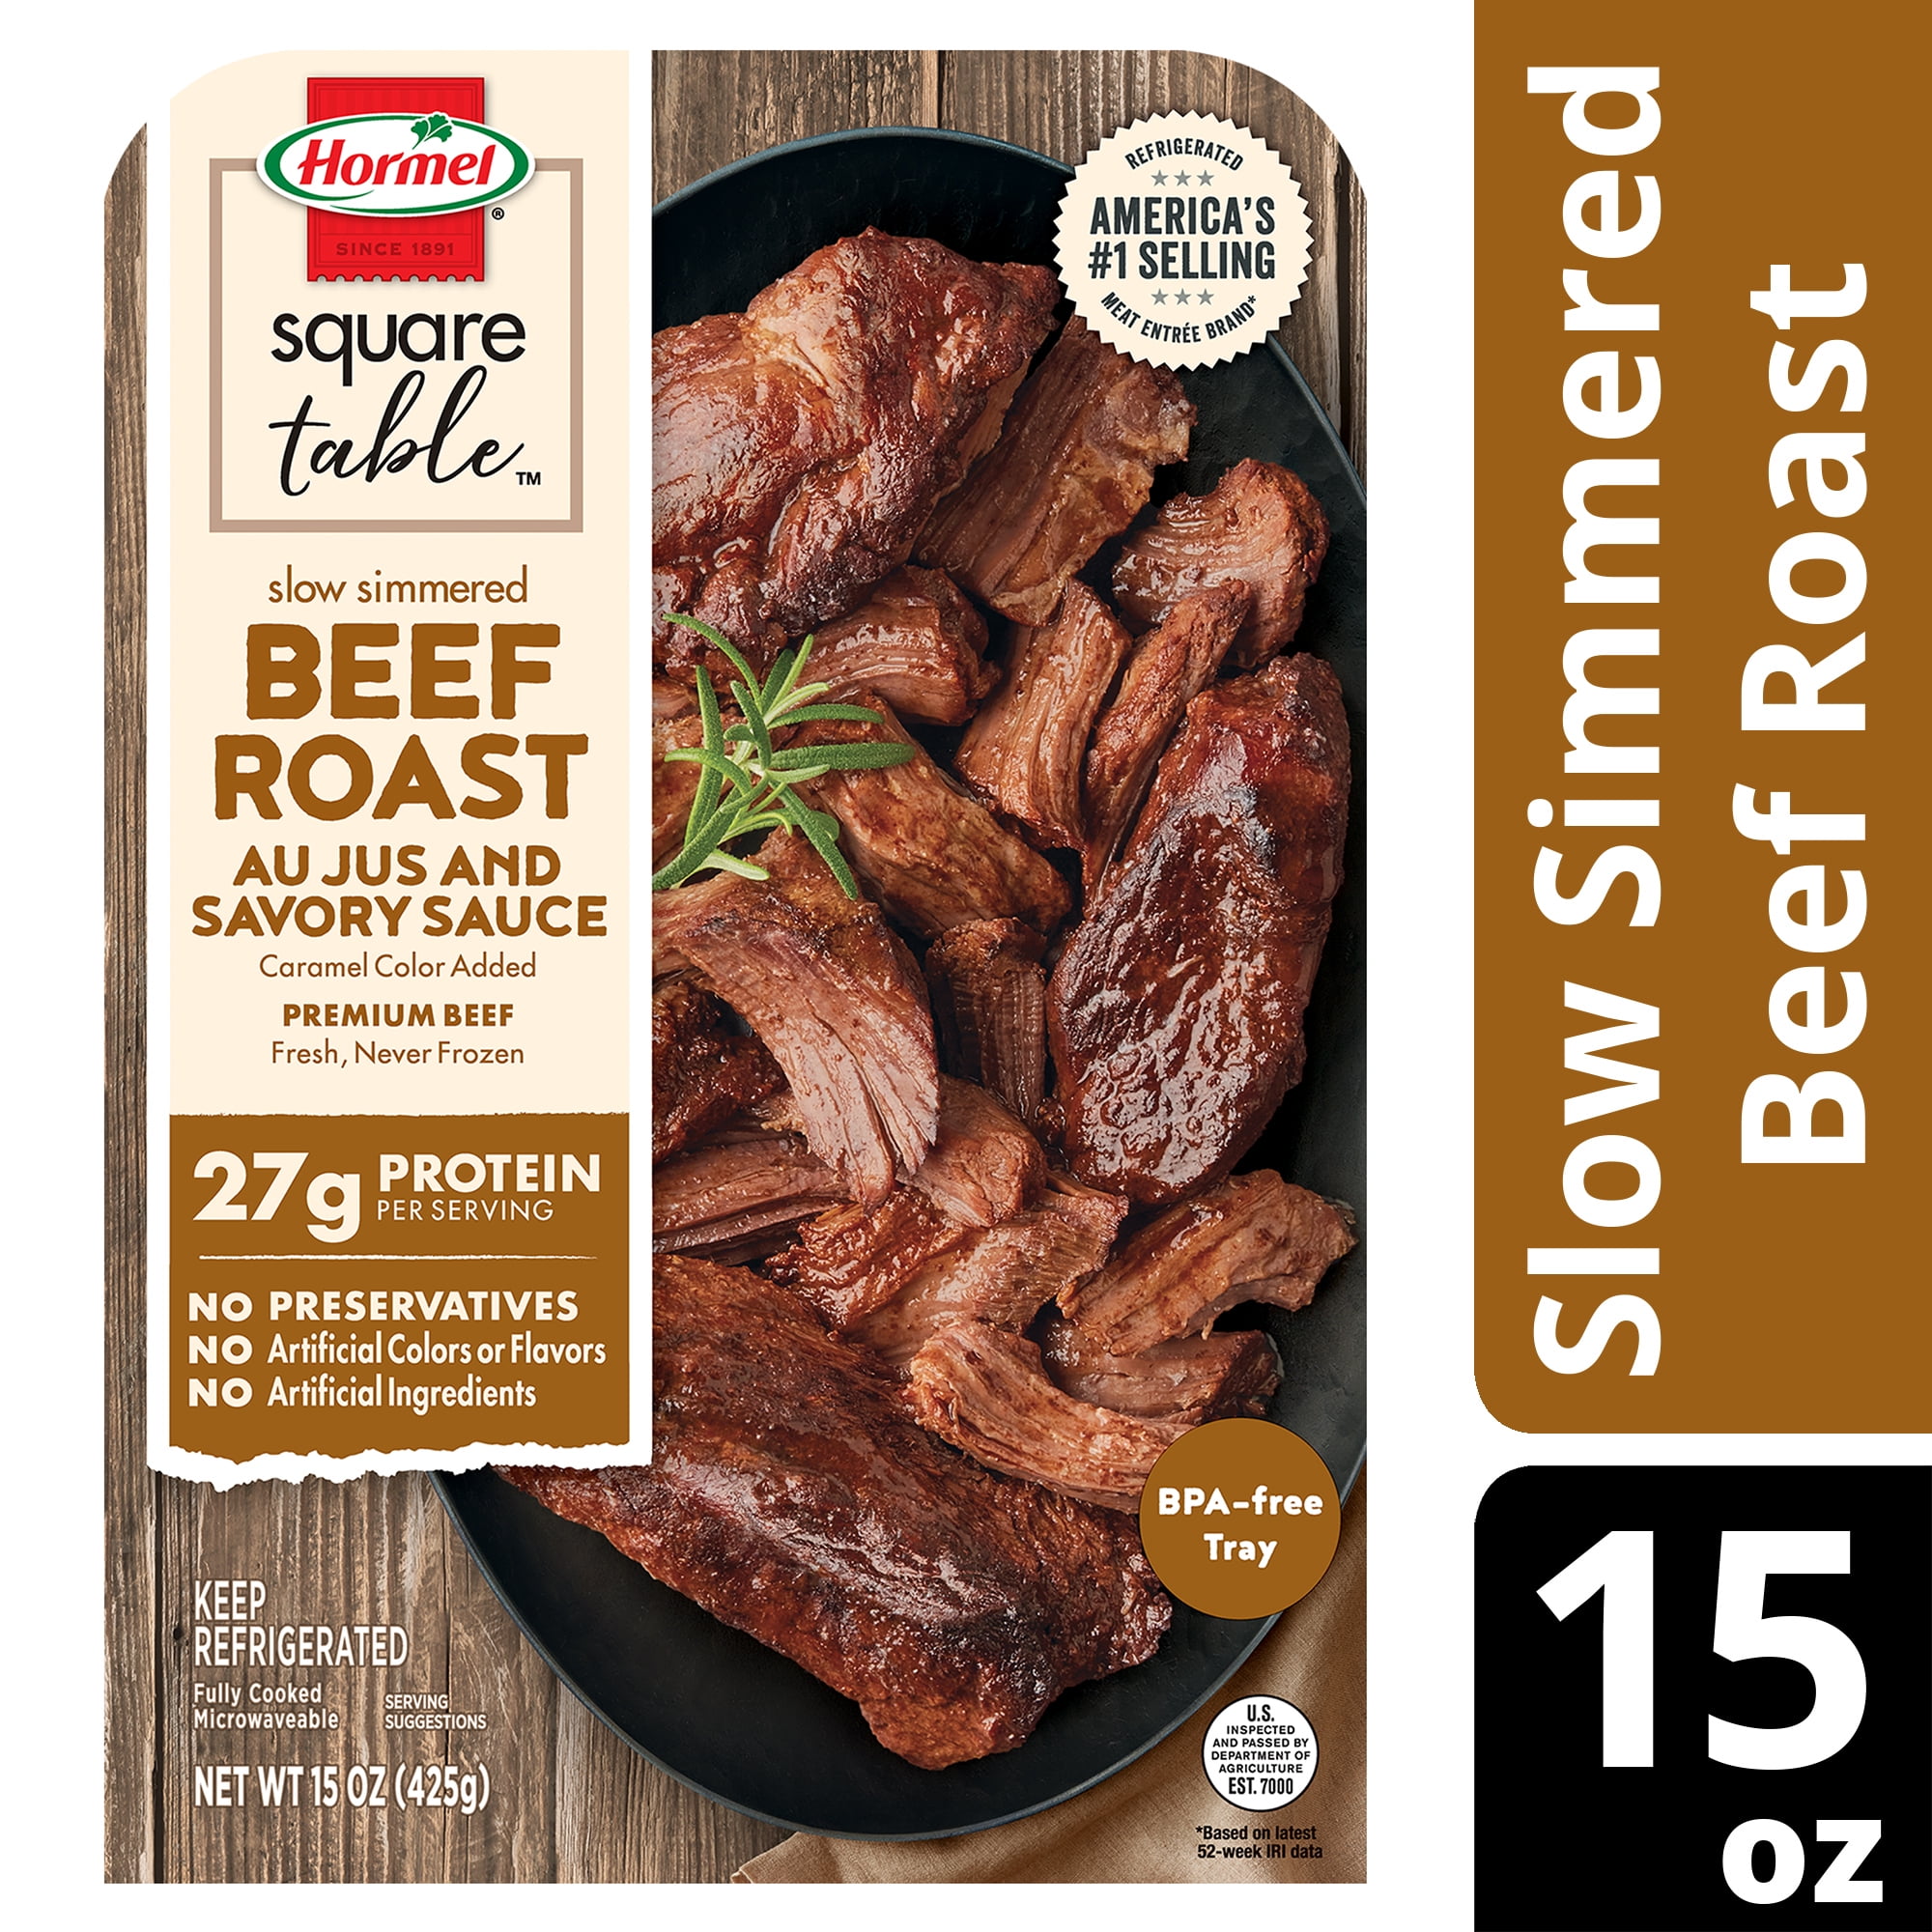 Hormel Square Table Slow Simmered Beef Roast Au Jus & Savory Sauce Refrigerated Entre, 15 oz Tray